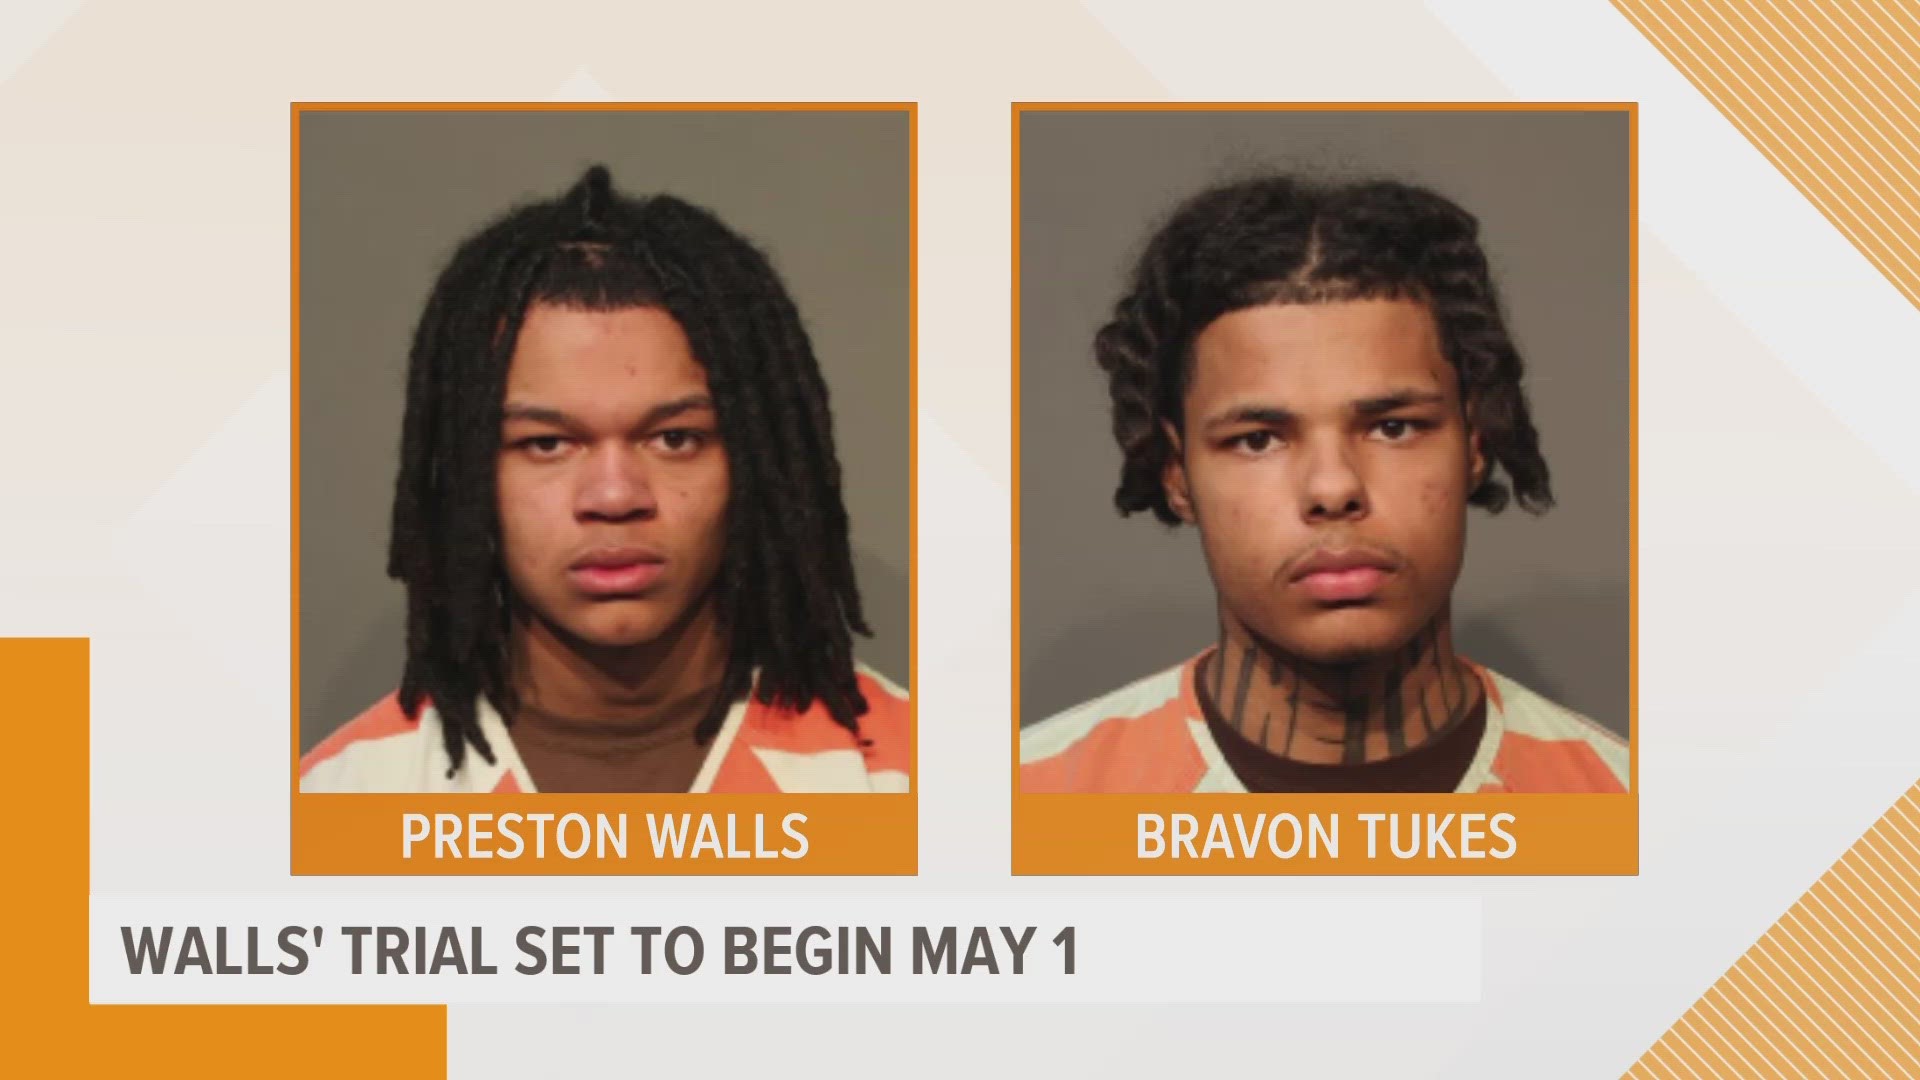 Bravon Tukes has been granted a separate trial from another suspect, Preston Walls, so Walls can testify in Tukes' trial.